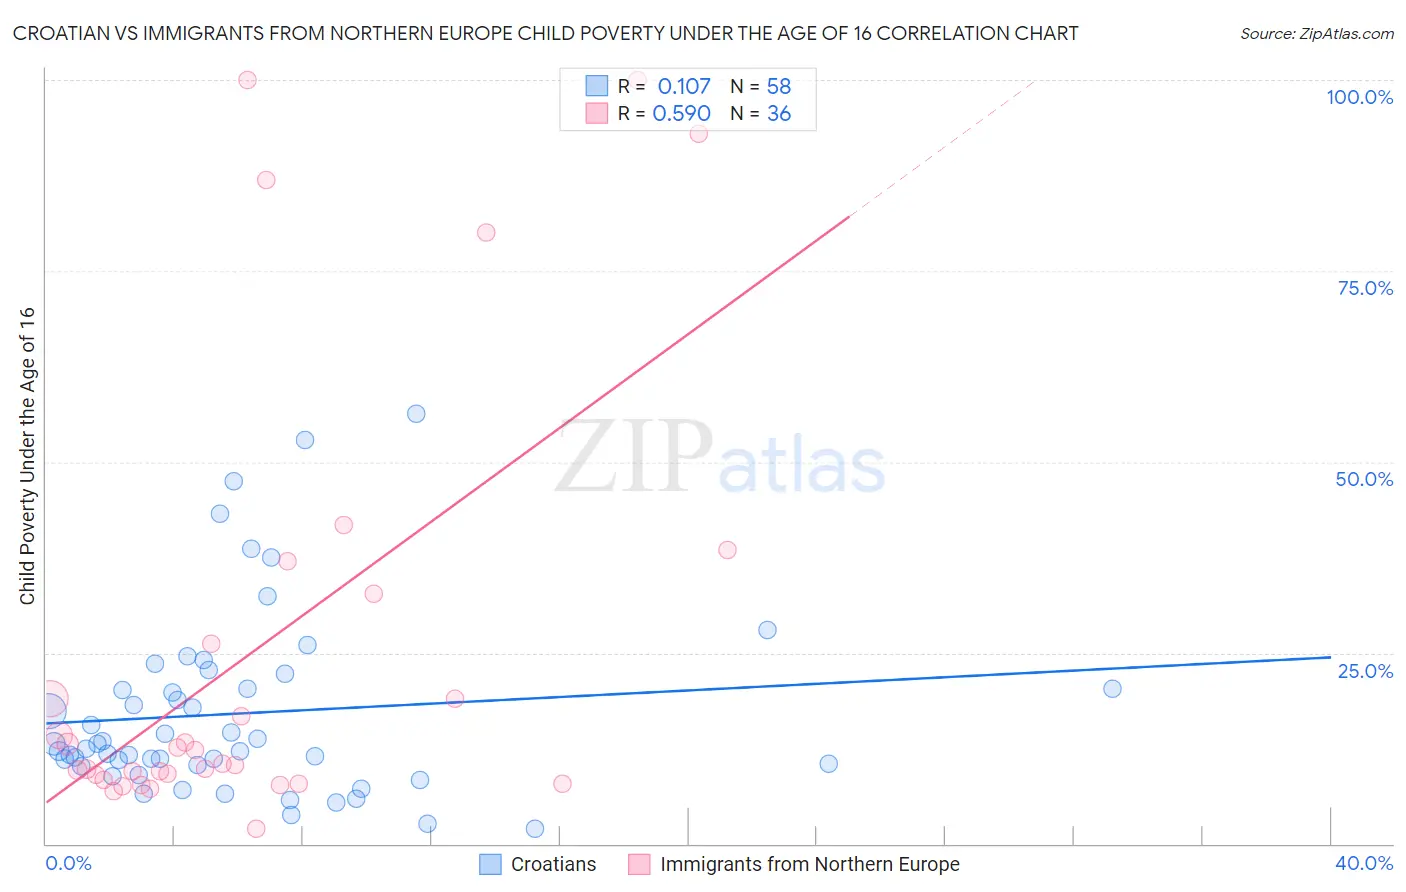 Croatian vs Immigrants from Northern Europe Child Poverty Under the Age of 16